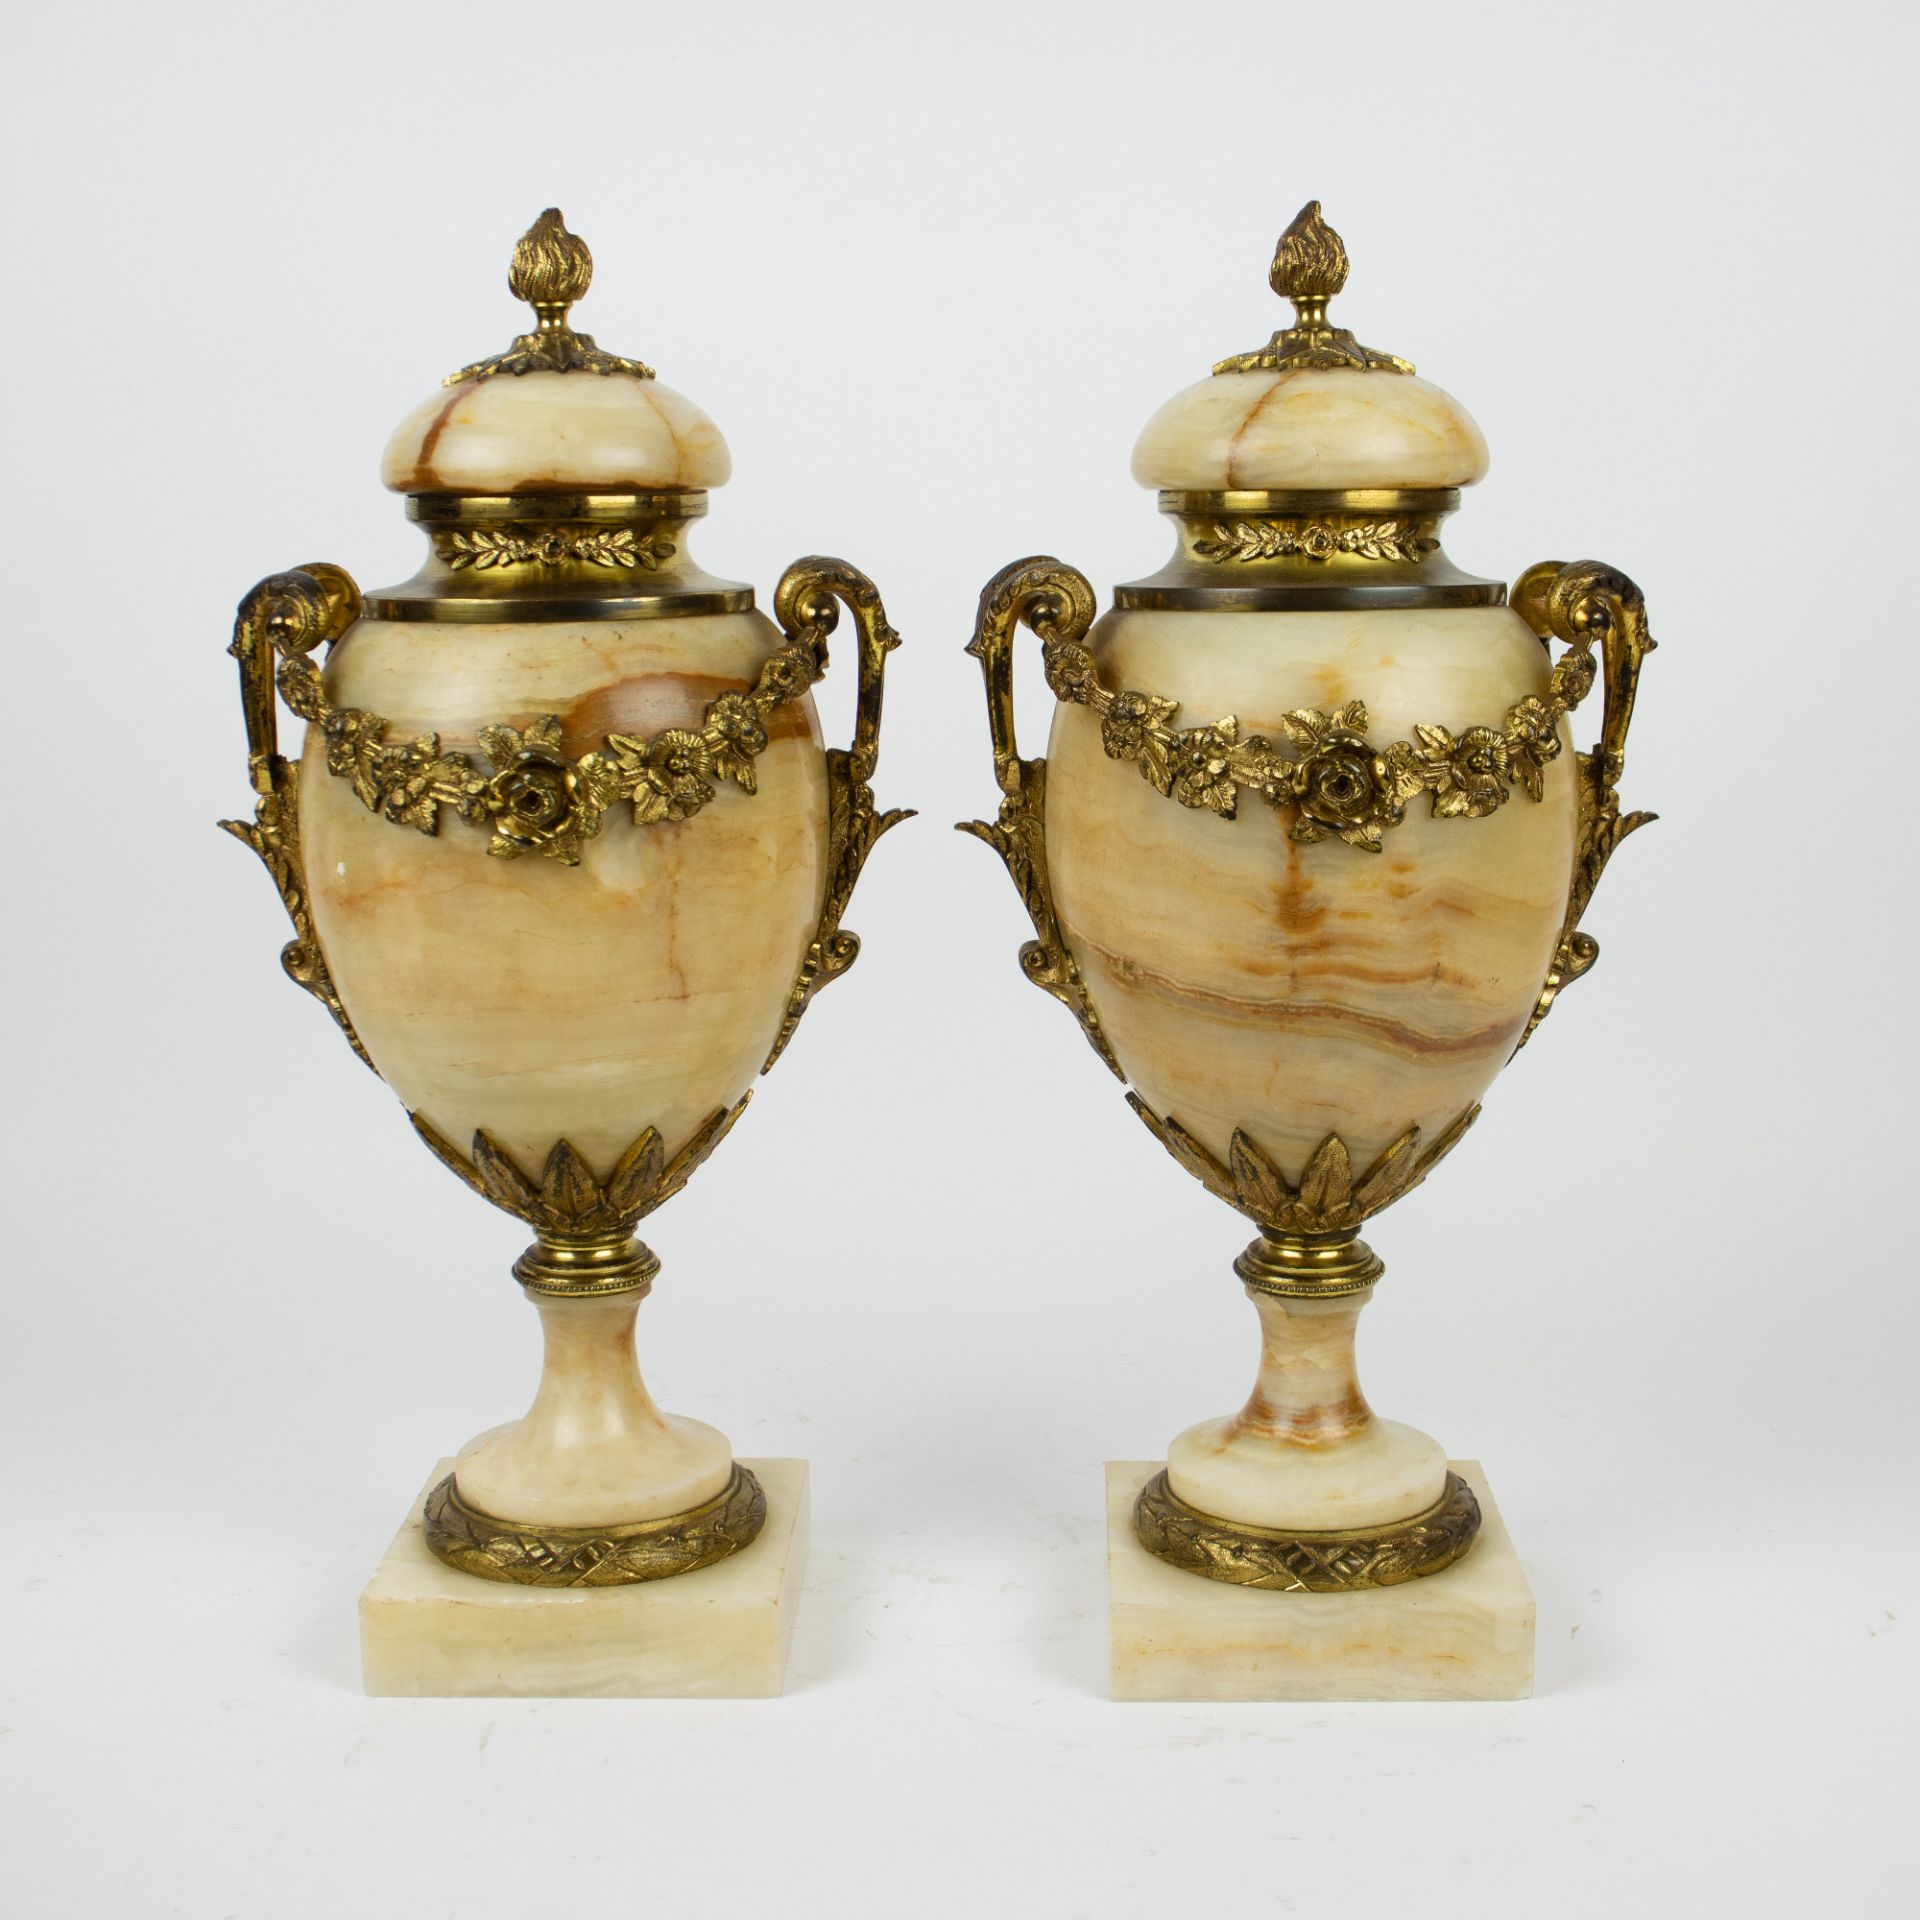 A pair of casolettes in marble with gilt bronze mounts